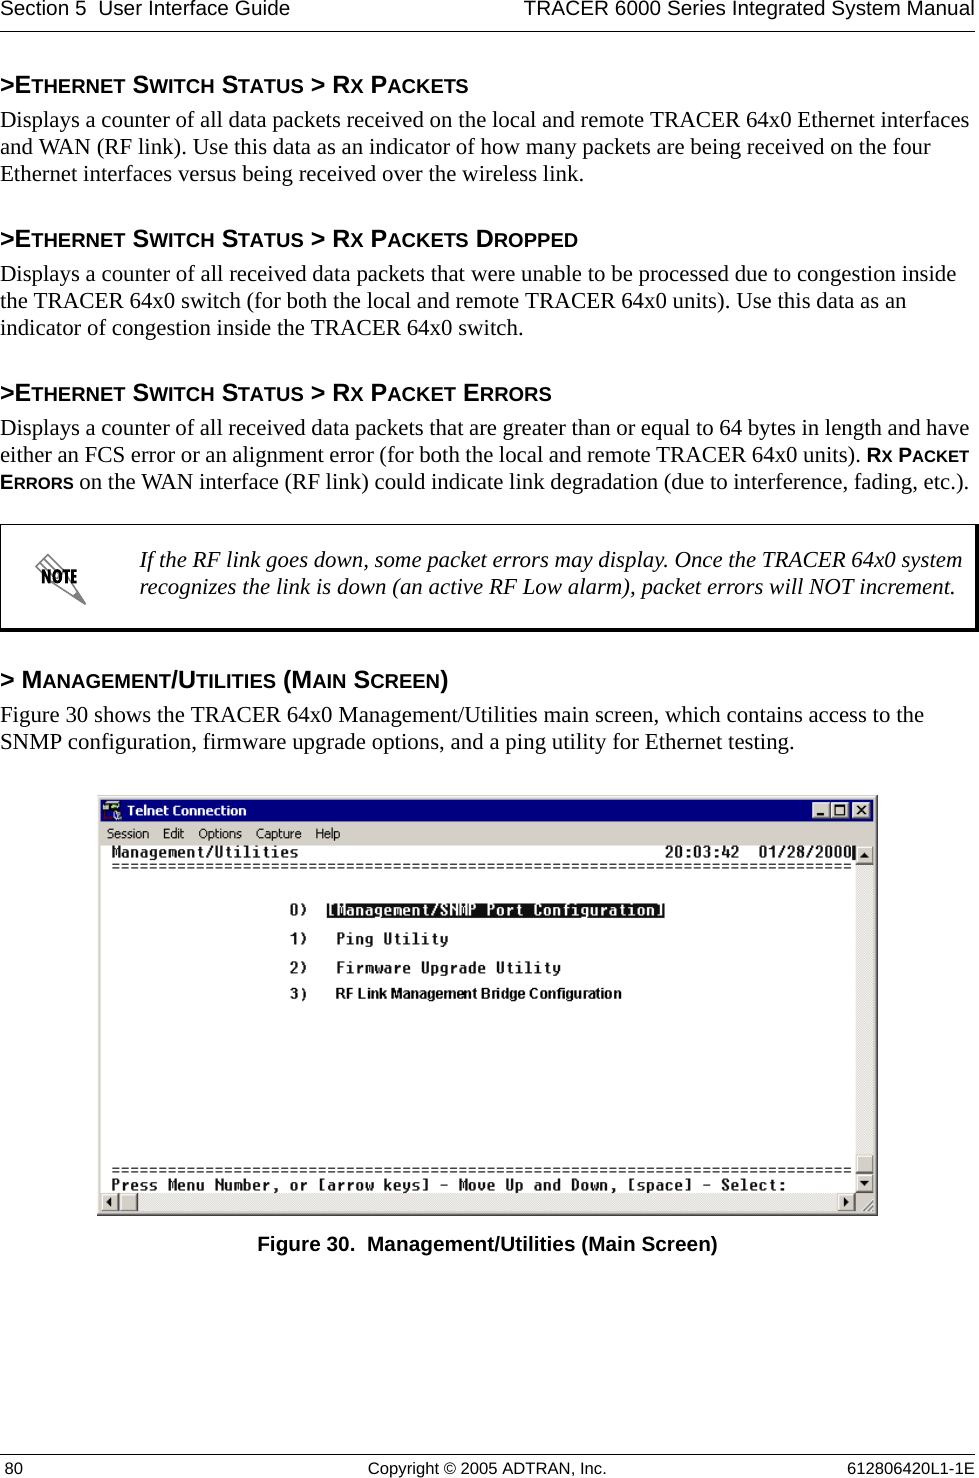 Section 5  User Interface Guide TRACER 6000 Series Integrated System Manual 80 Copyright © 2005 ADTRAN, Inc. 612806420L1-1E&gt;ETHERNET SWITCH STATUS &gt; RX PACKETSDisplays a counter of all data packets received on the local and remote TRACER 64x0 Ethernet interfaces and WAN (RF link). Use this data as an indicator of how many packets are being received on the four Ethernet interfaces versus being received over the wireless link.&gt;ETHERNET SWITCH STATUS &gt; RX PACKETS DROPPEDDisplays a counter of all received data packets that were unable to be processed due to congestion inside the TRACER 64x0 switch (for both the local and remote TRACER 64x0 units). Use this data as an indicator of congestion inside the TRACER 64x0 switch. &gt;ETHERNET SWITCH STATUS &gt; RX PACKET ERRORSDisplays a counter of all received data packets that are greater than or equal to 64 bytes in length and have either an FCS error or an alignment error (for both the local and remote TRACER 64x0 units). RX PACKET ERRORS on the WAN interface (RF link) could indicate link degradation (due to interference, fading, etc.). &gt; MANAGEMENT/UTILITIES (MAIN SCREEN)Figure 30 shows the TRACER 64x0 Management/Utilities main screen, which contains access to the SNMP configuration, firmware upgrade options, and a ping utility for Ethernet testing.Figure 30.  Management/Utilities (Main Screen)If the RF link goes down, some packet errors may display. Once the TRACER 64x0 system recognizes the link is down (an active RF Low alarm), packet errors will NOT increment.